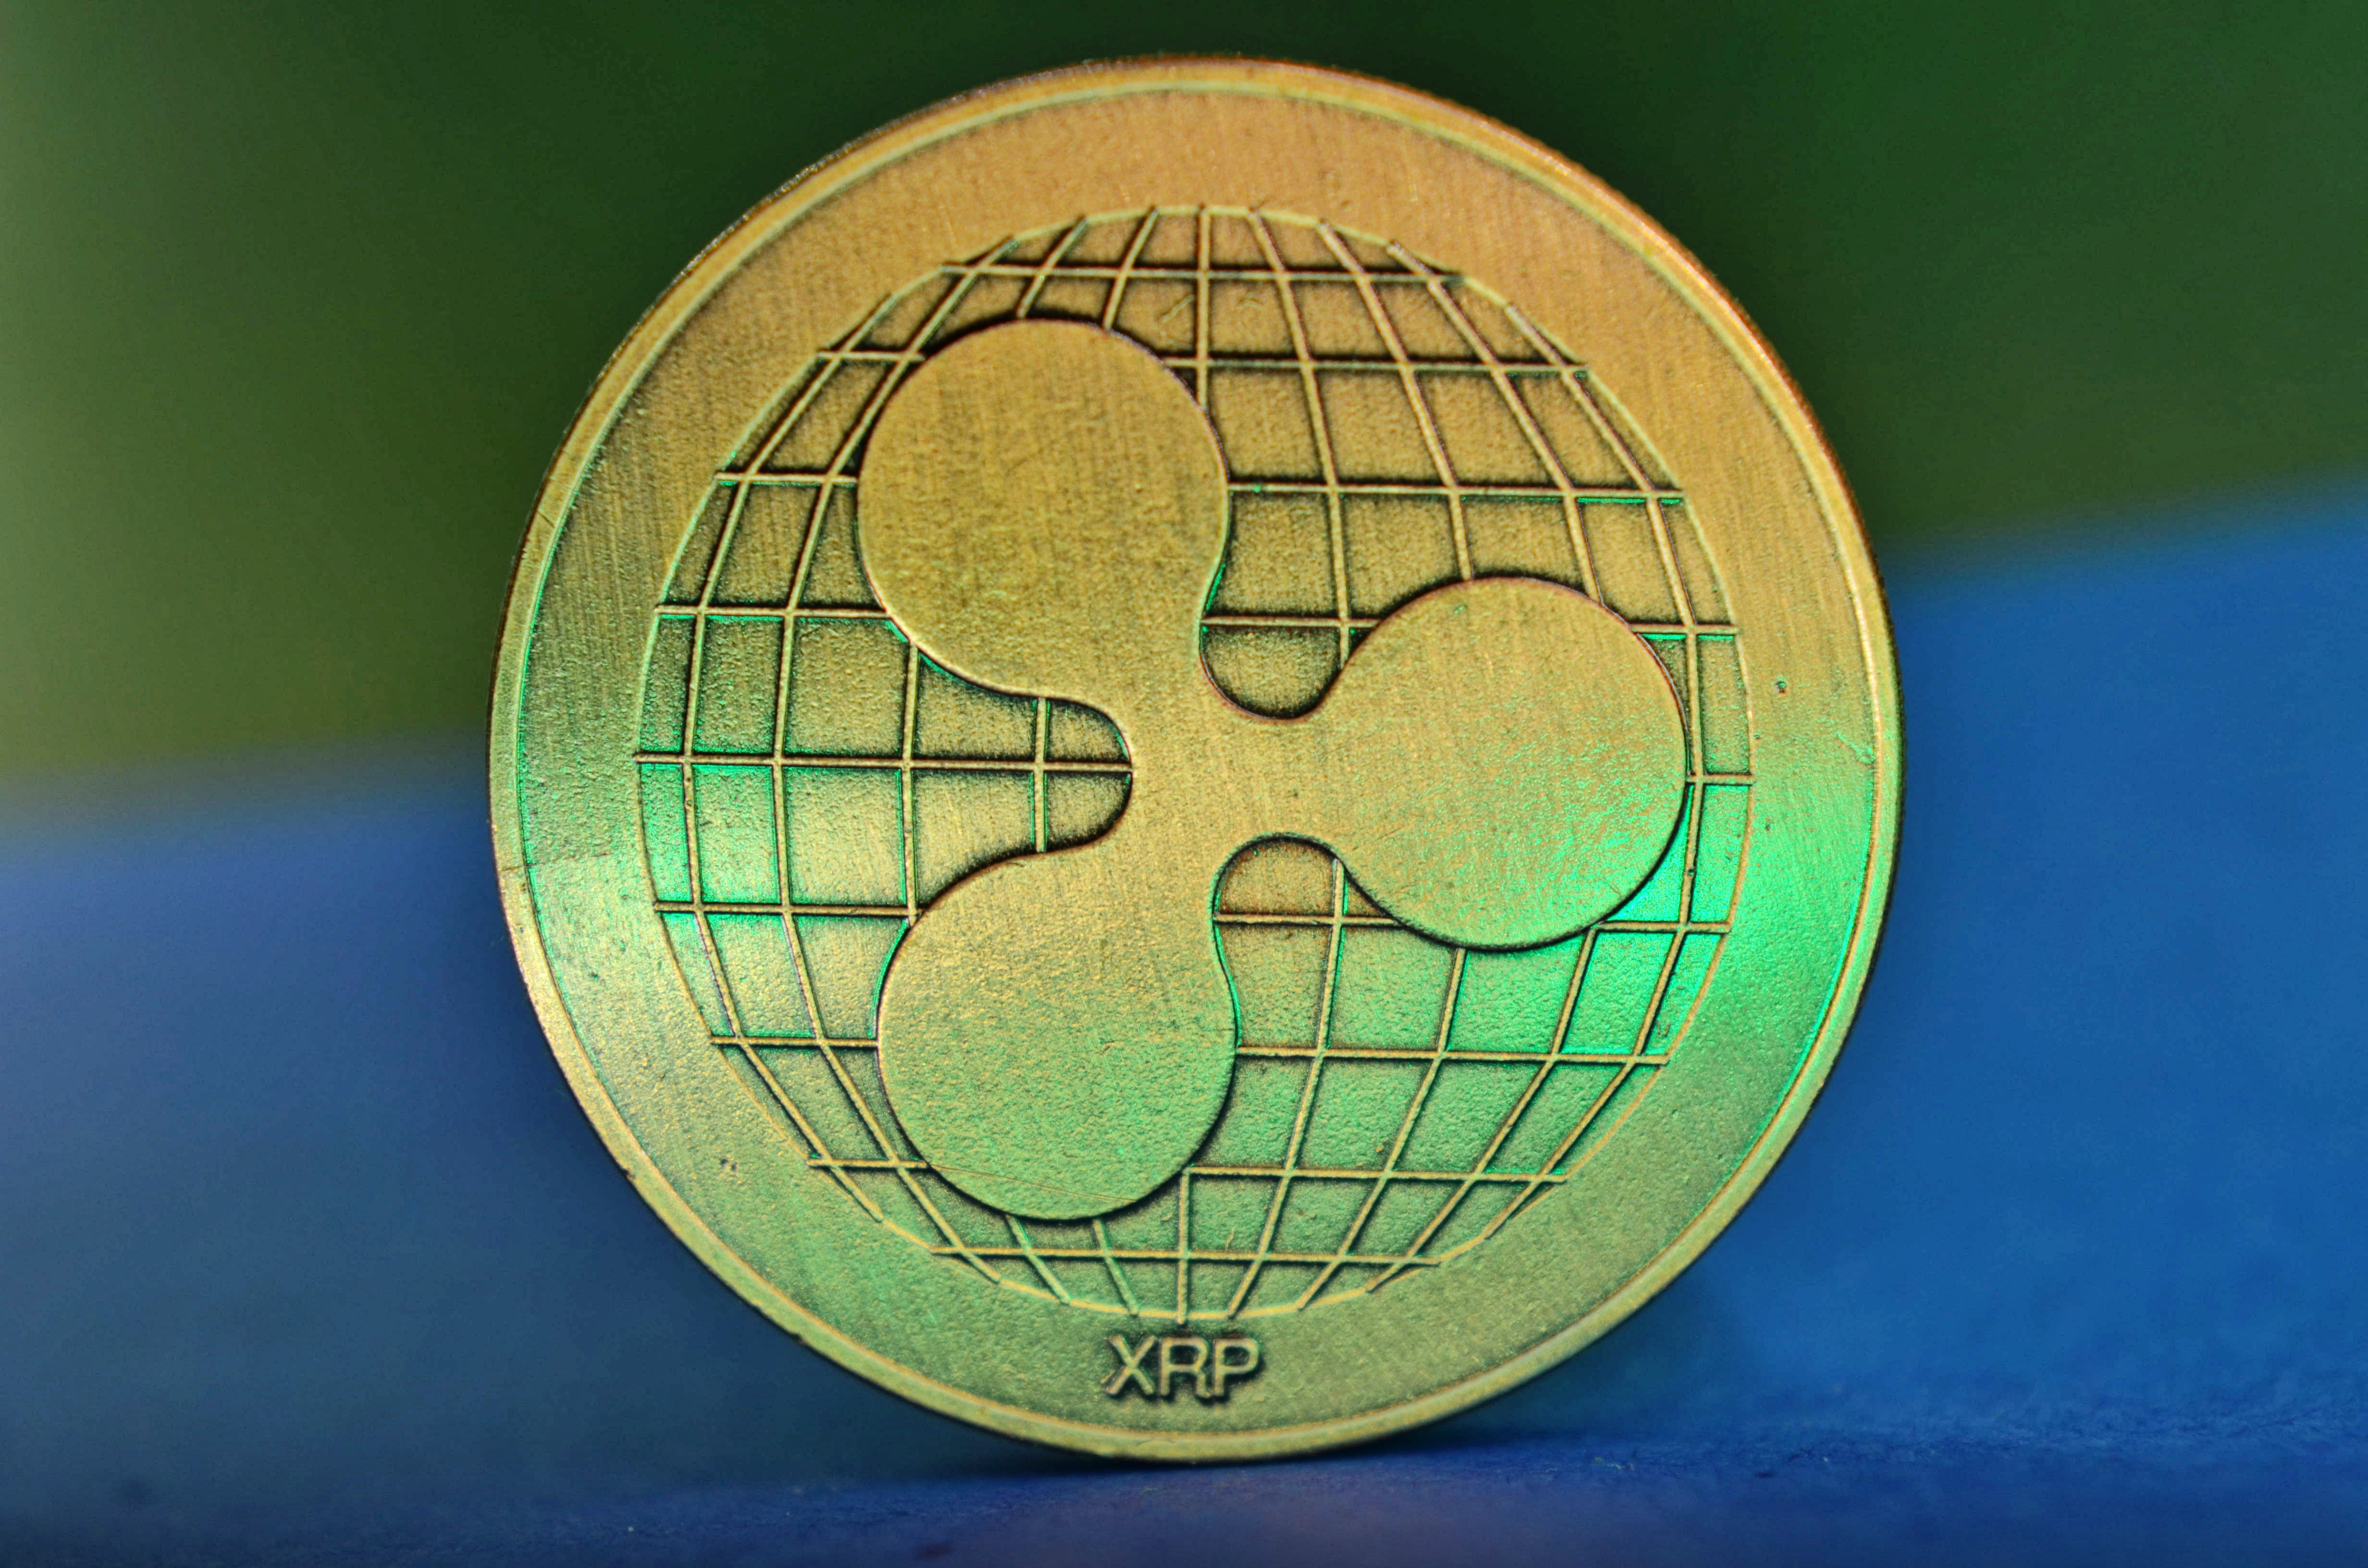 Golden Ripple XRP coin image - Free stock photo - Public ...